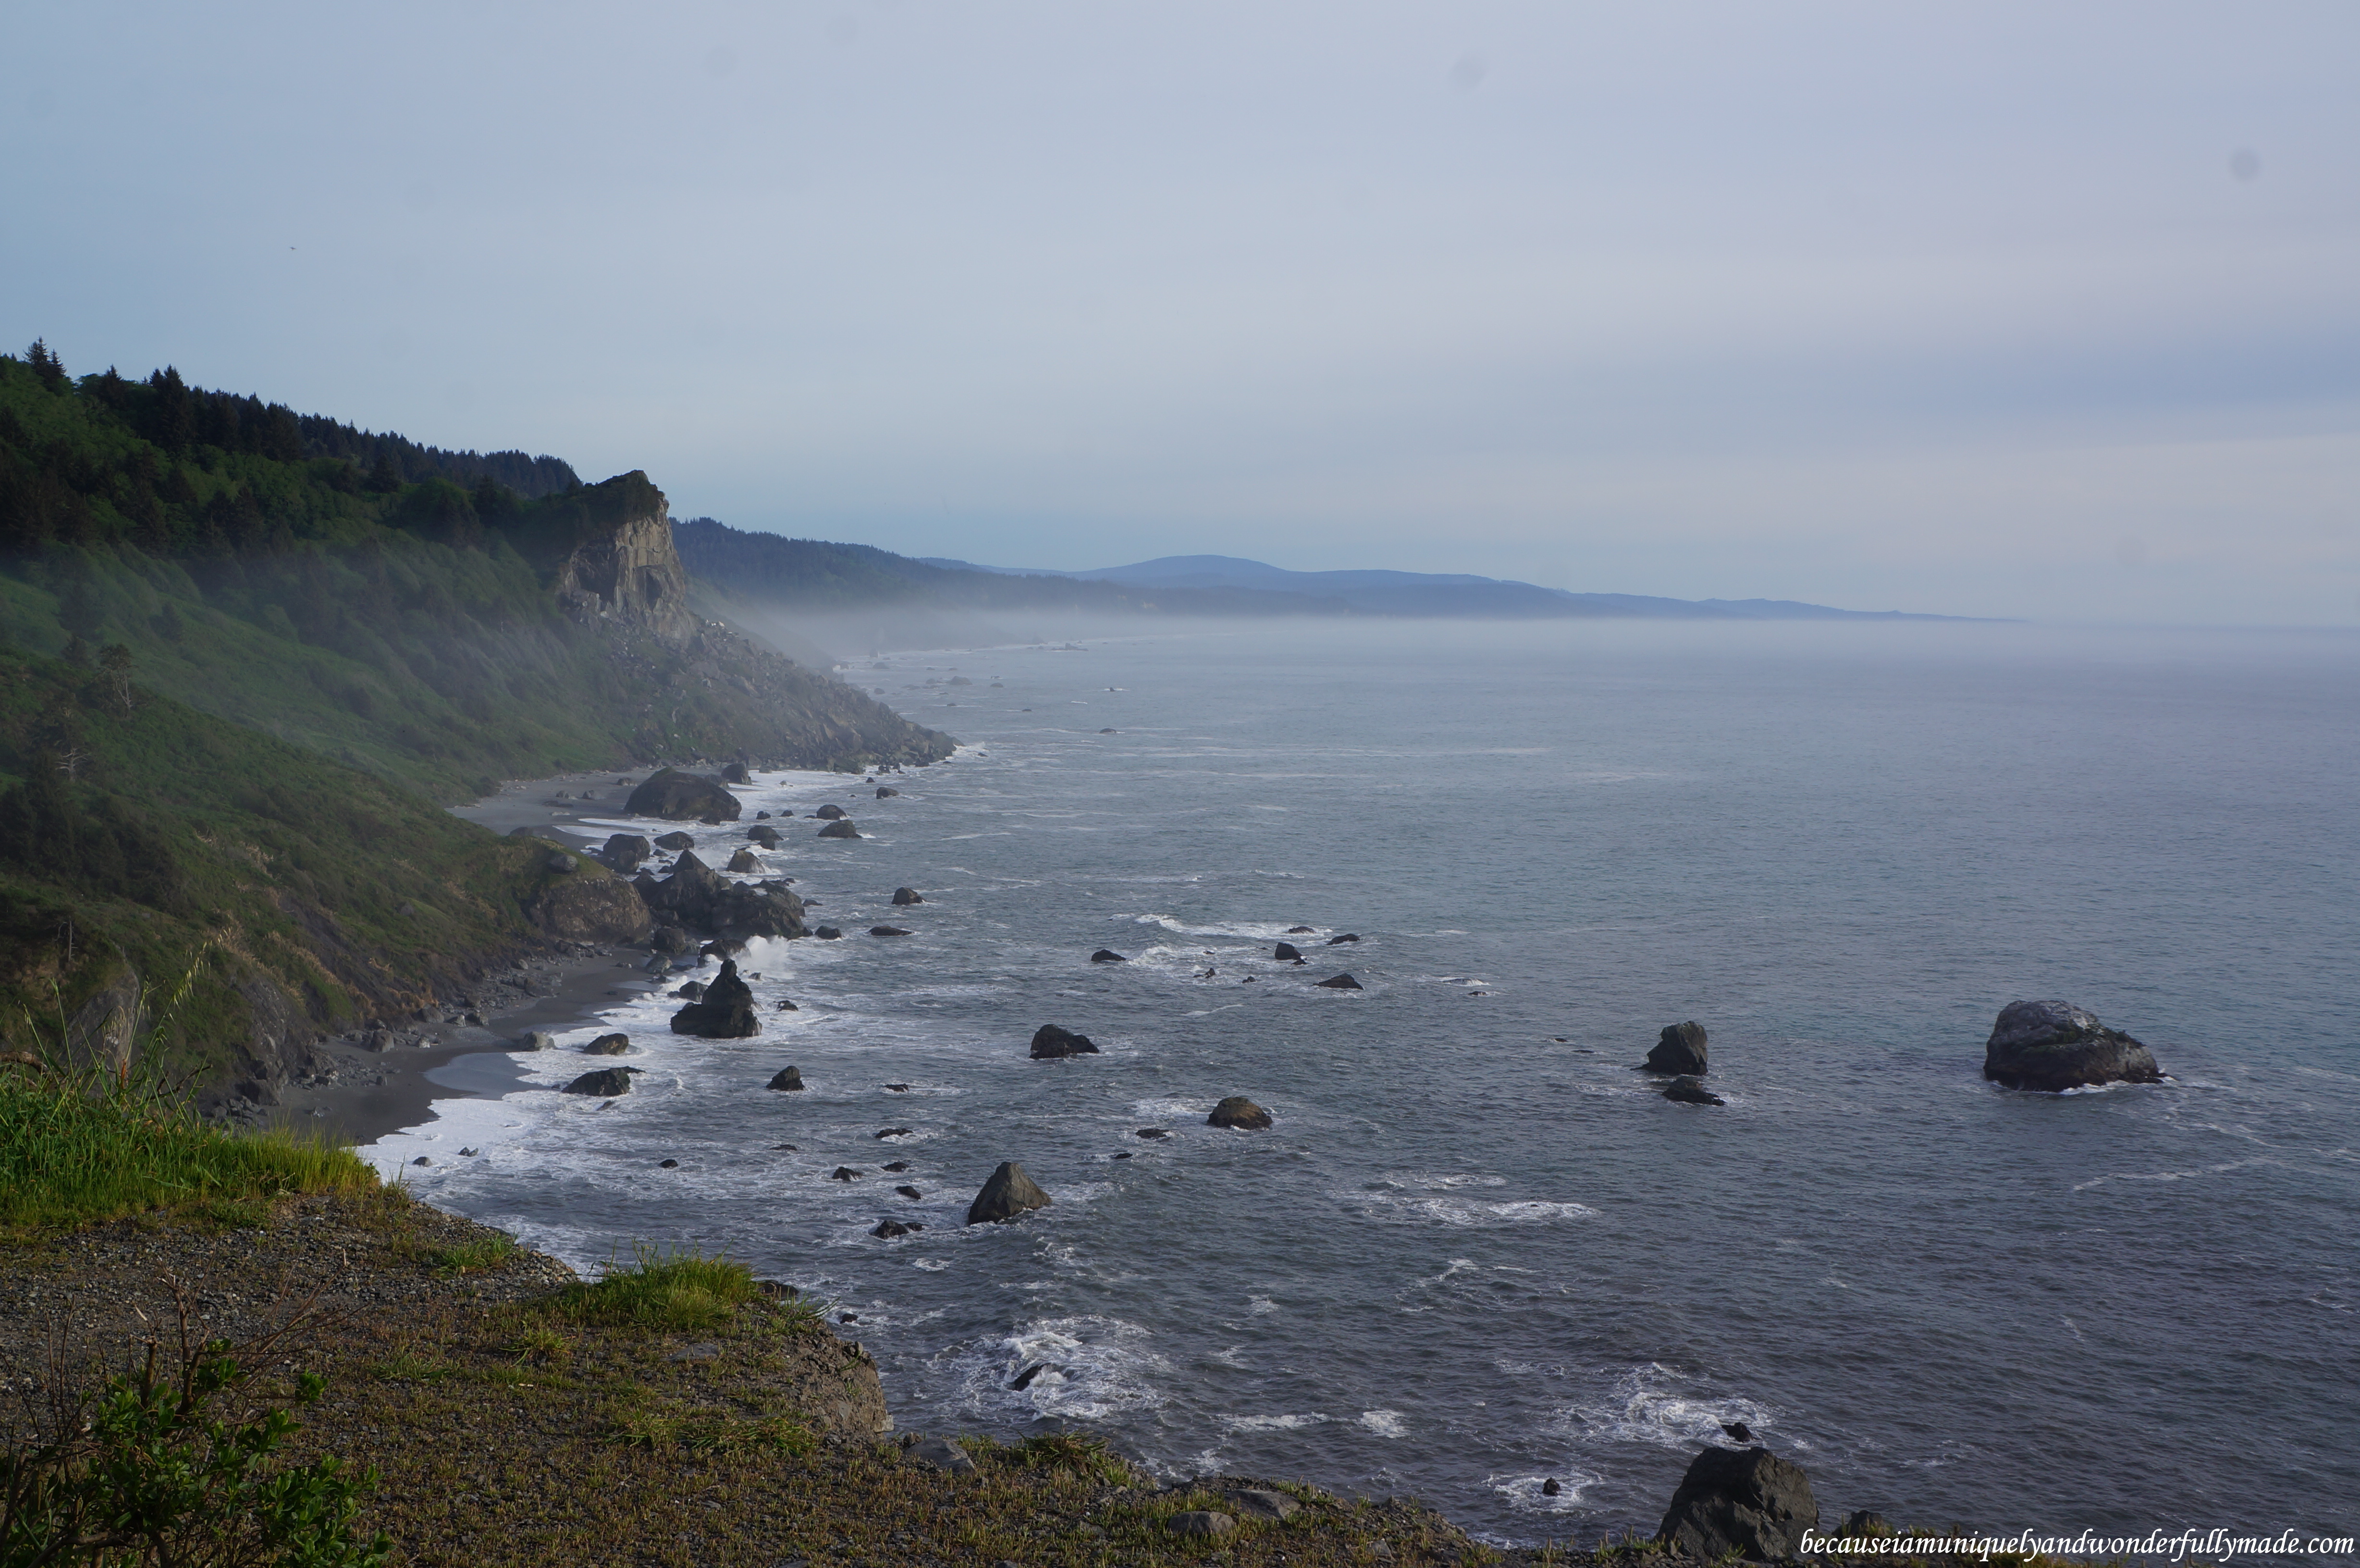 A slightly visible mist crawling from the coast to the end stretch of the Pacific Ocean as viewed from the High Bluff Overlook.